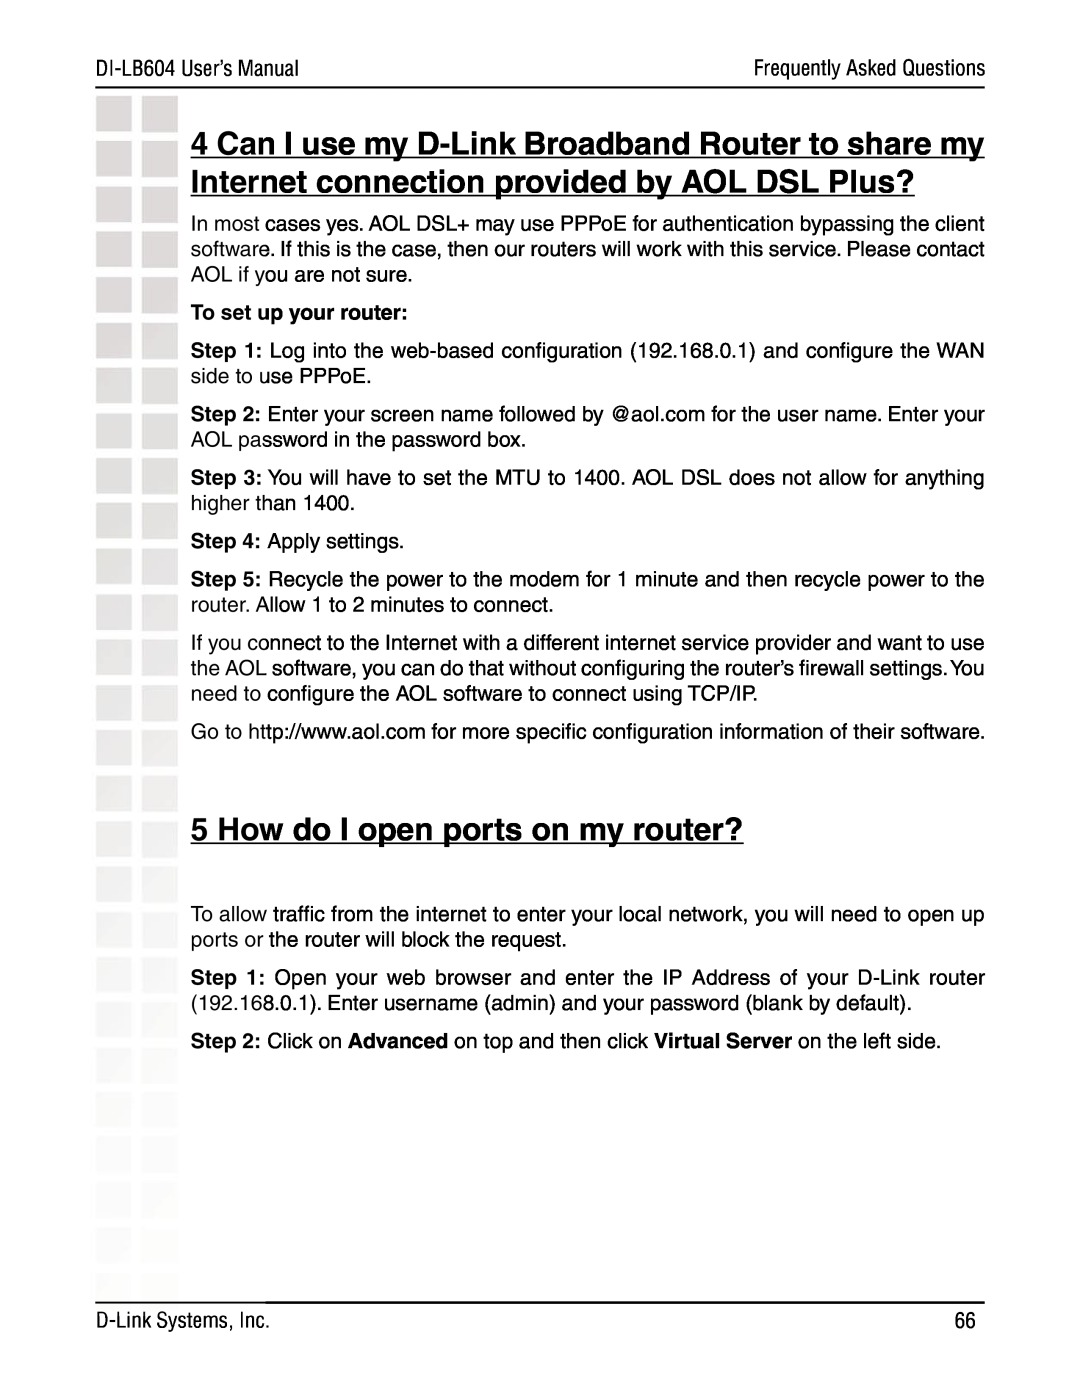 D-Link DI-LB604 manual How do I open ports on my router?, To set up your router 